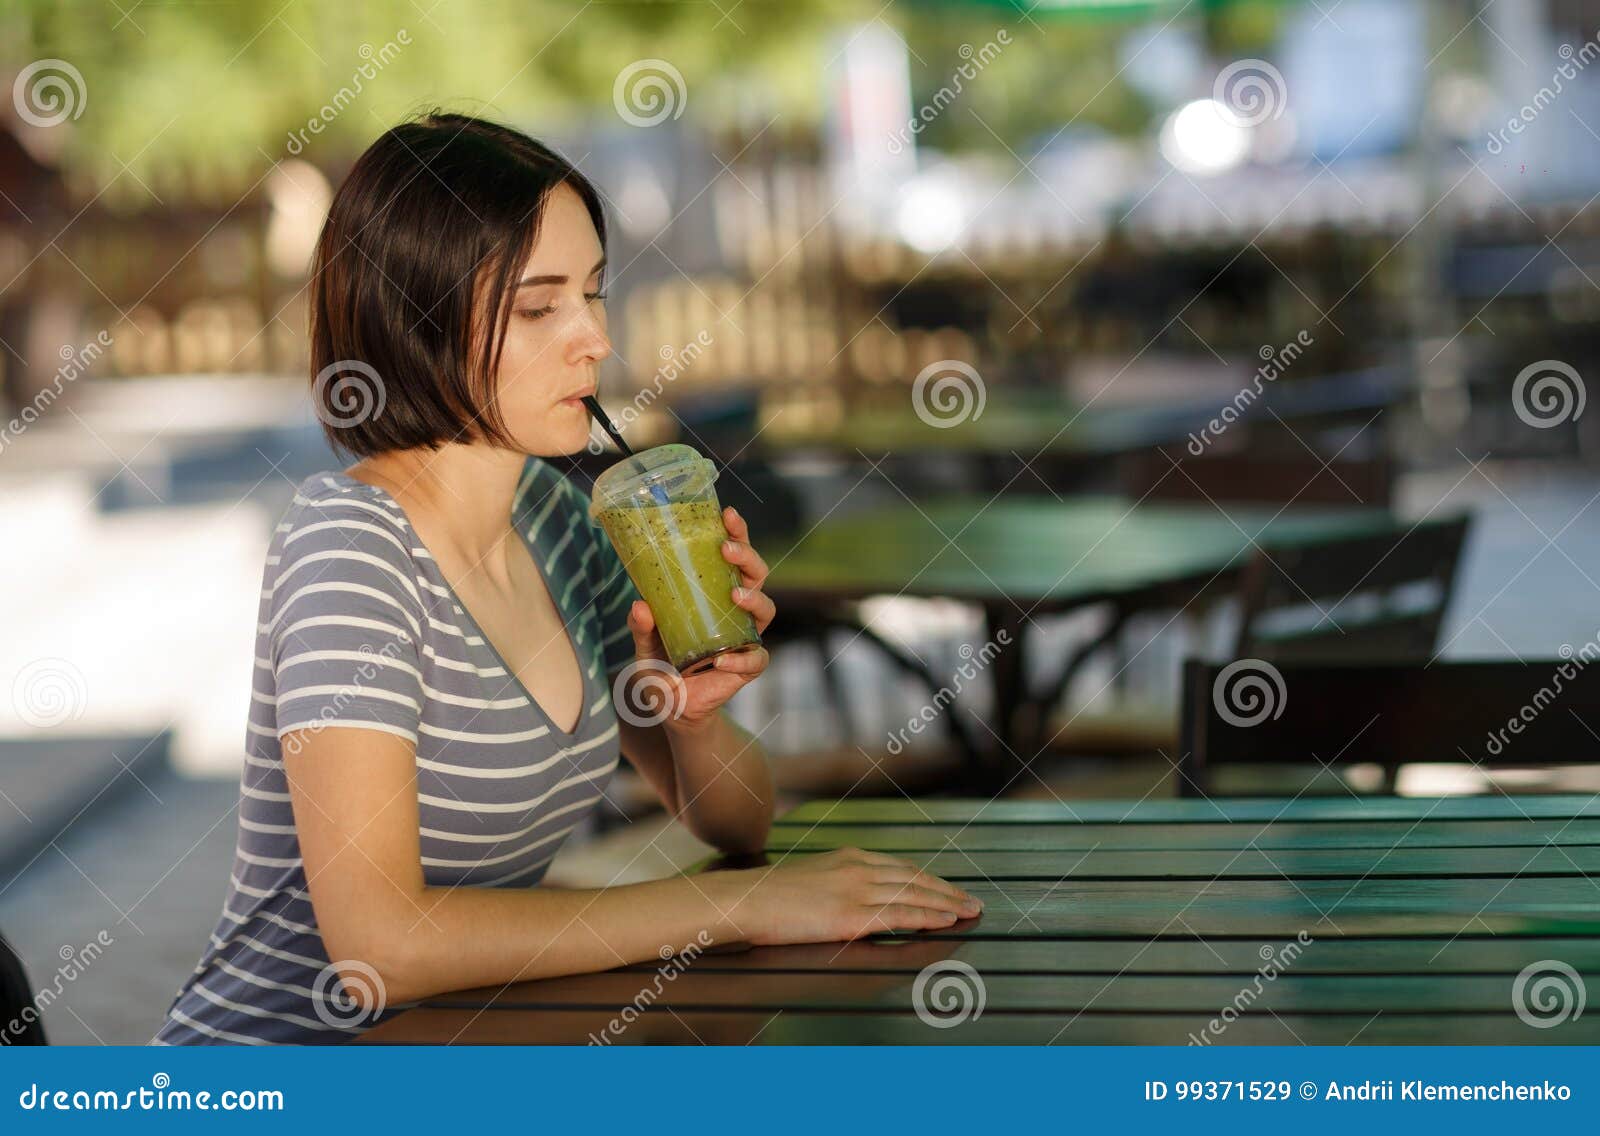 Positive Girl with a Smoothie. Smiling Woman Sitting at the Blurred ...